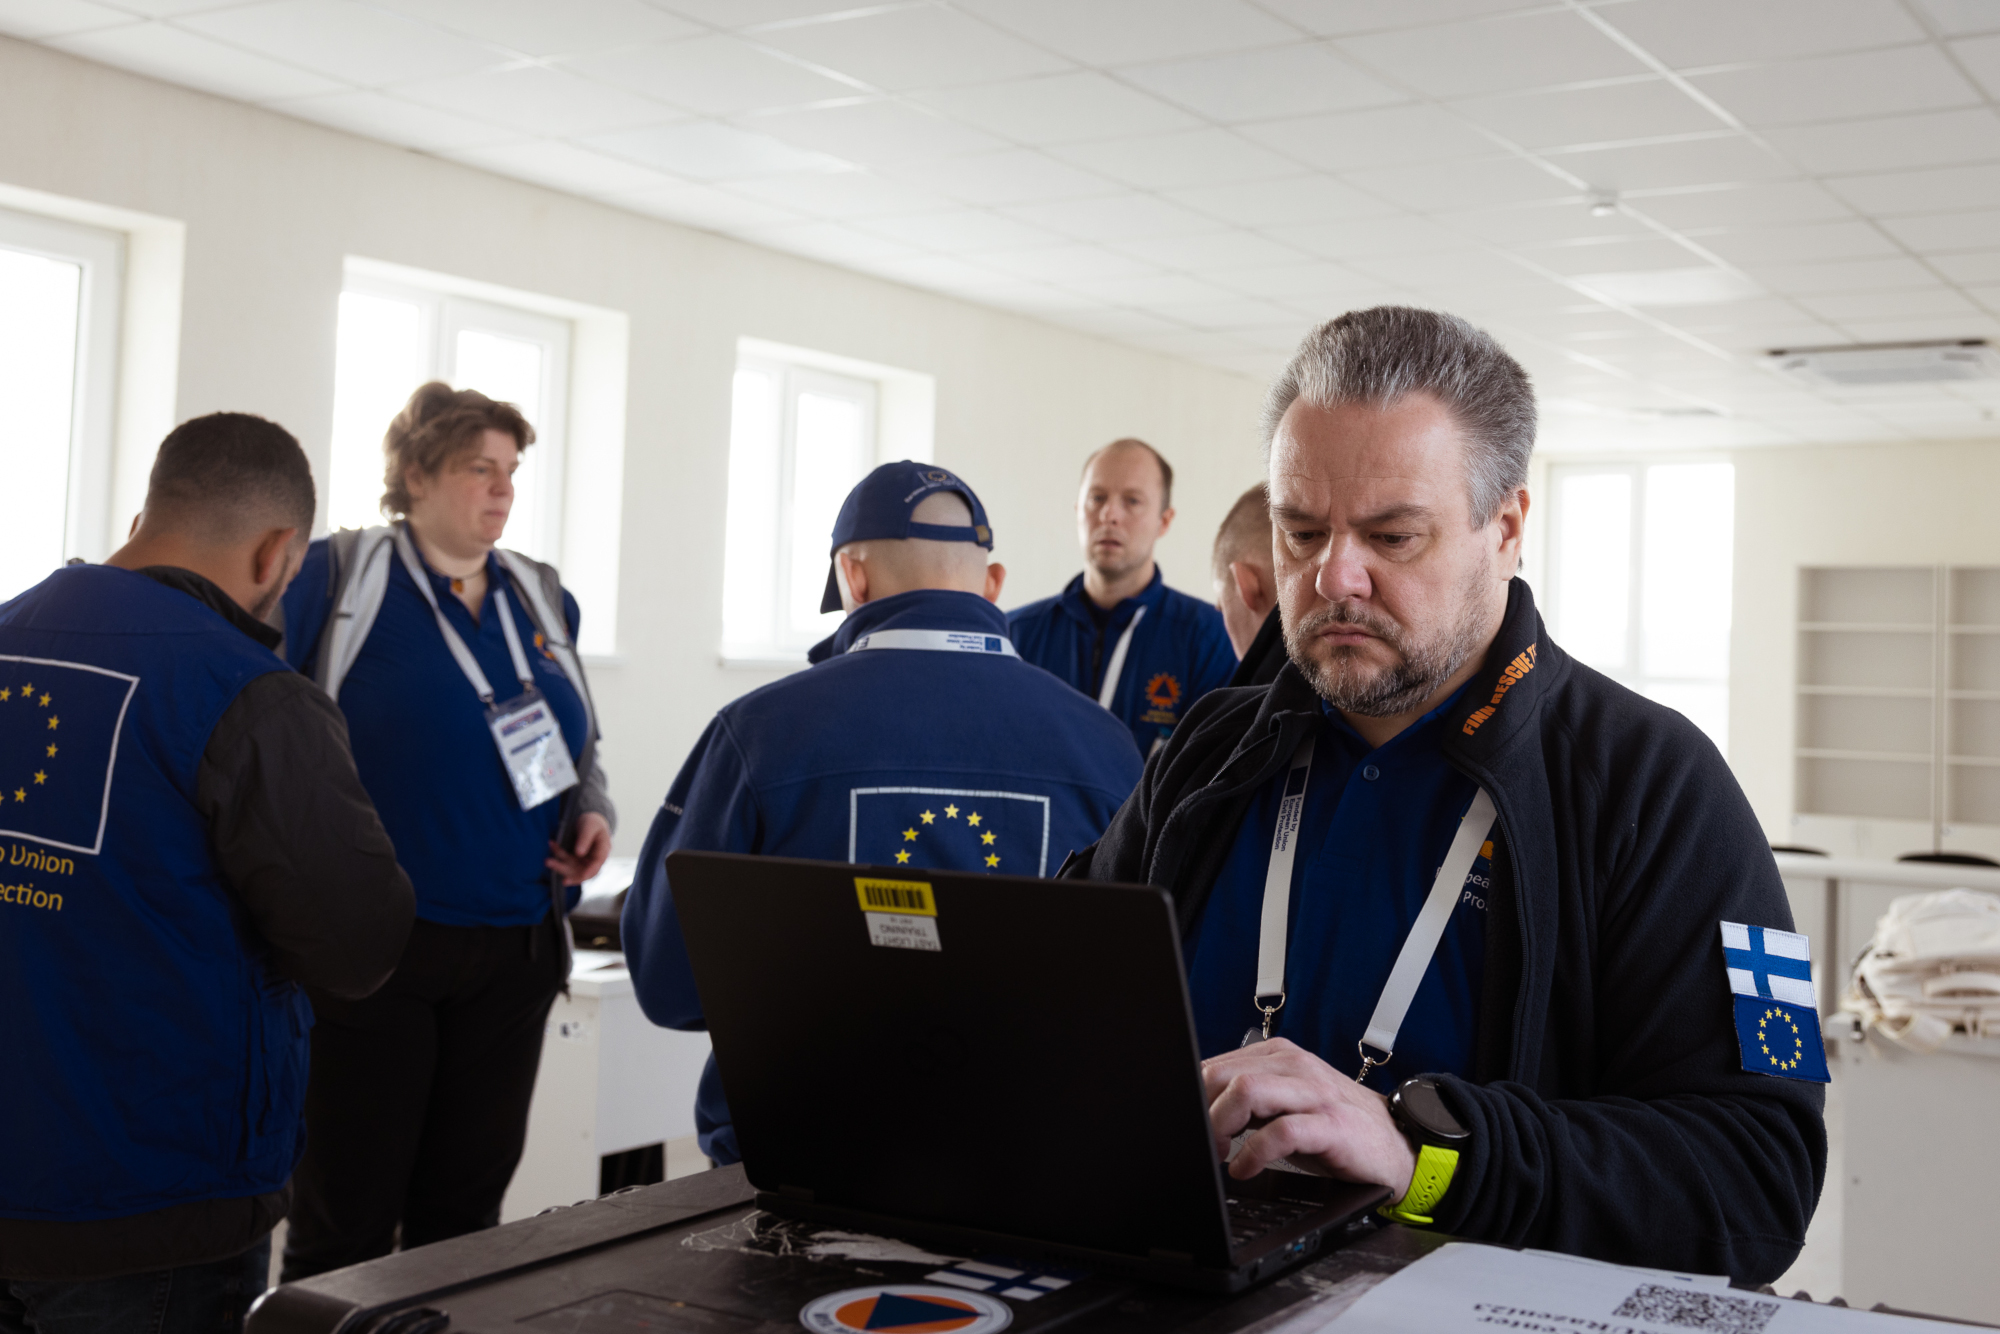 Read more about the article The role of the EUCPT, the European Union Civil Protection Team